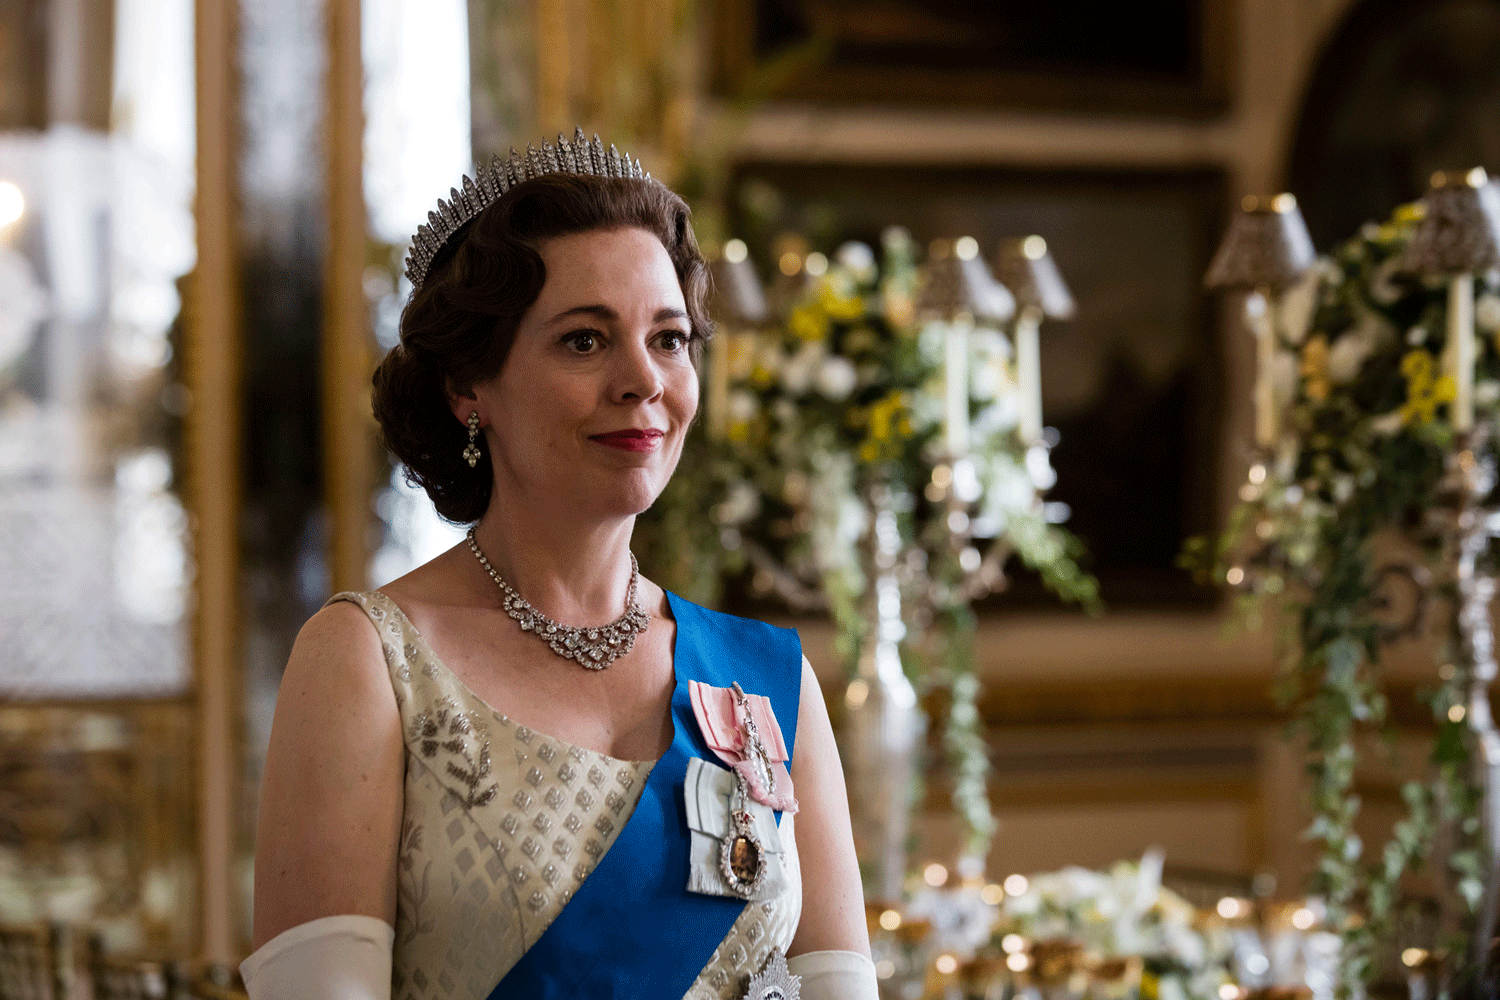 A New Podcast Series Has Arrived For ‘The Crown’ Devotees